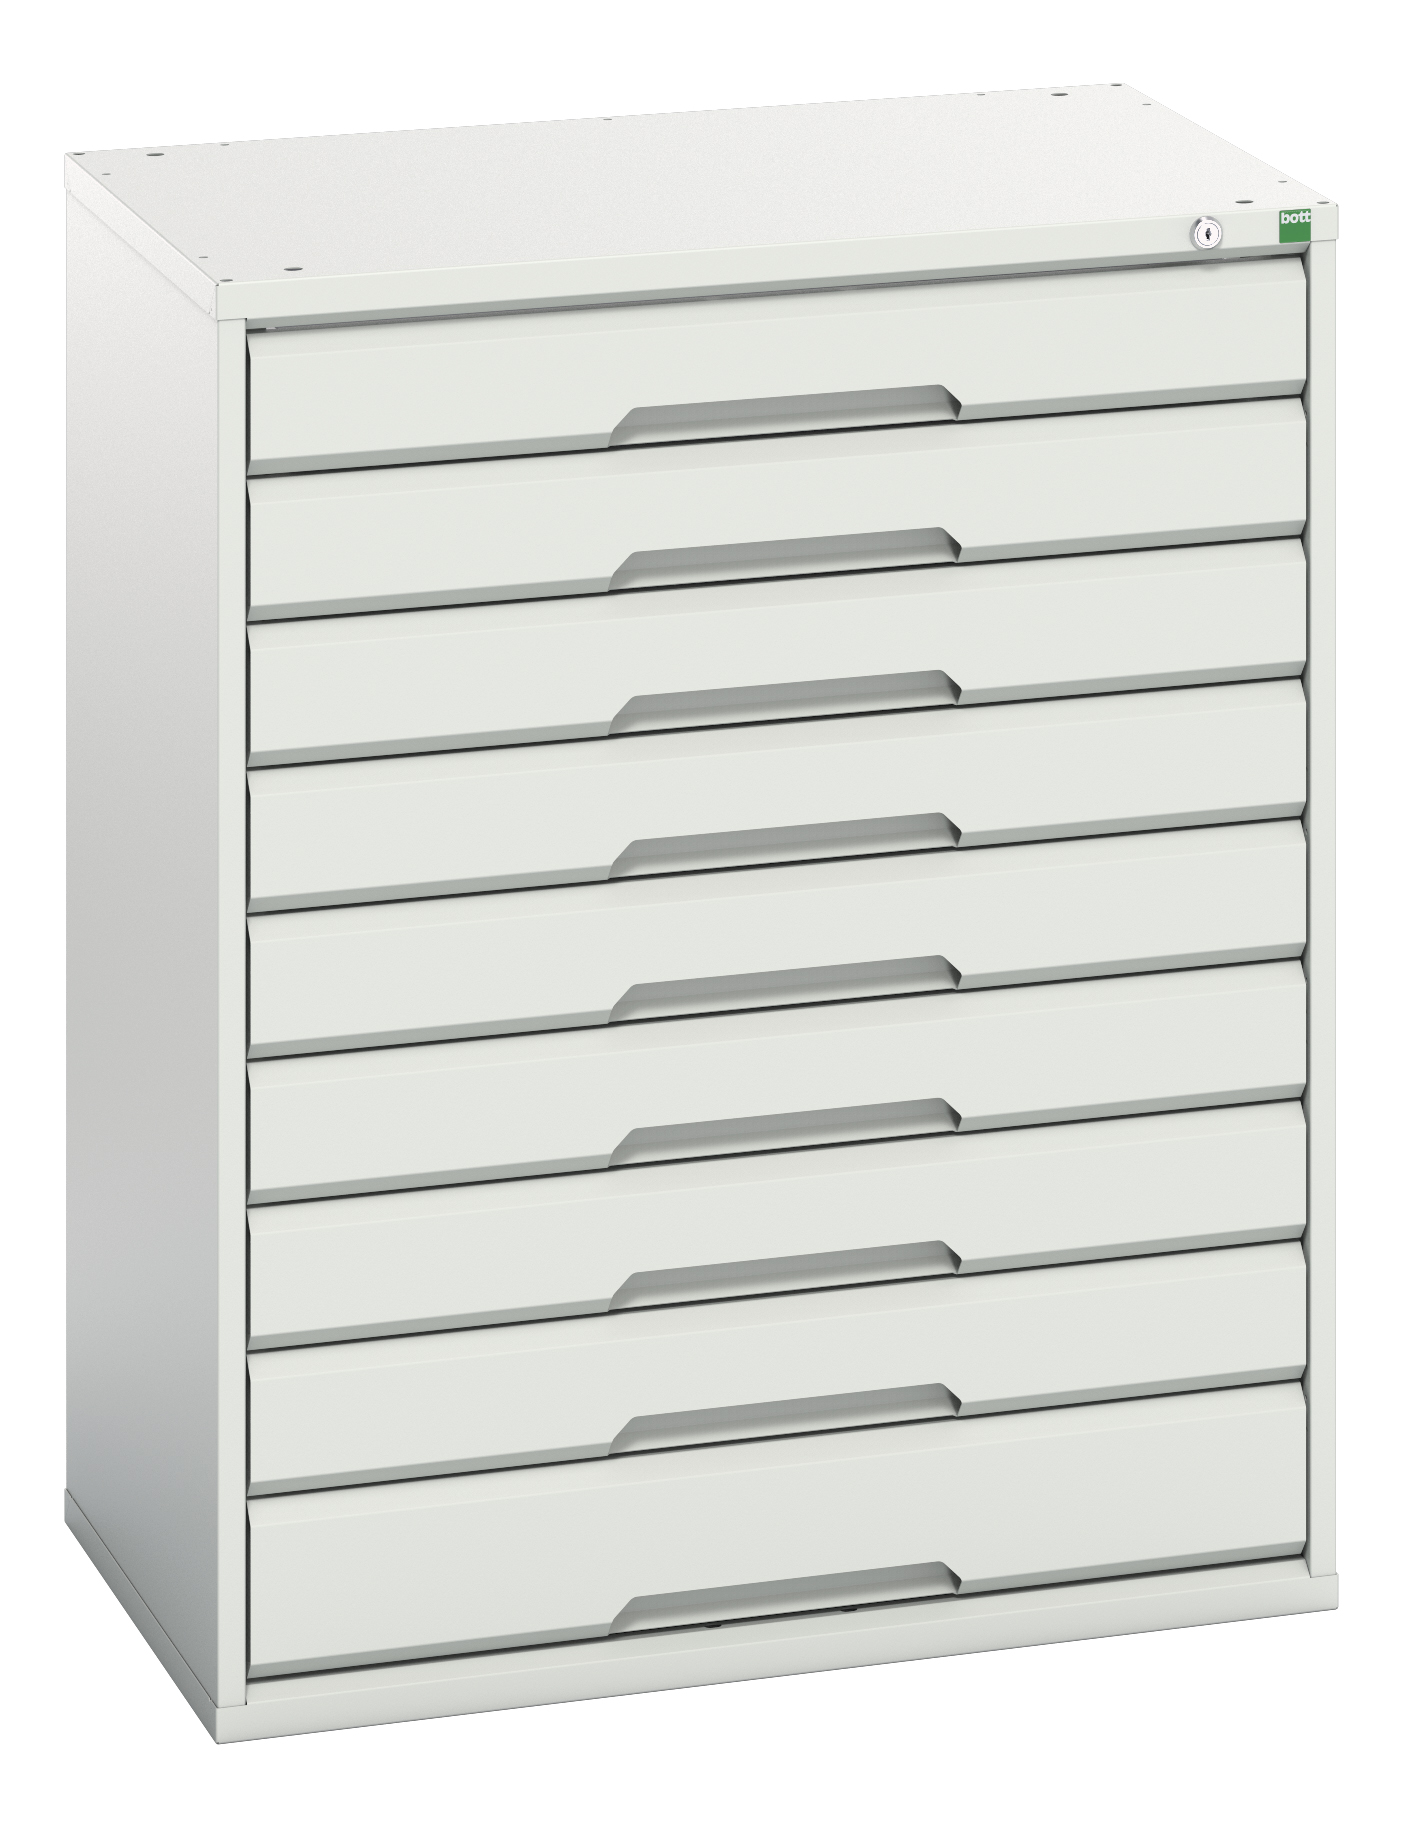 Bott Verso Drawer Cabinet With 9 Drawers - 16925157.16